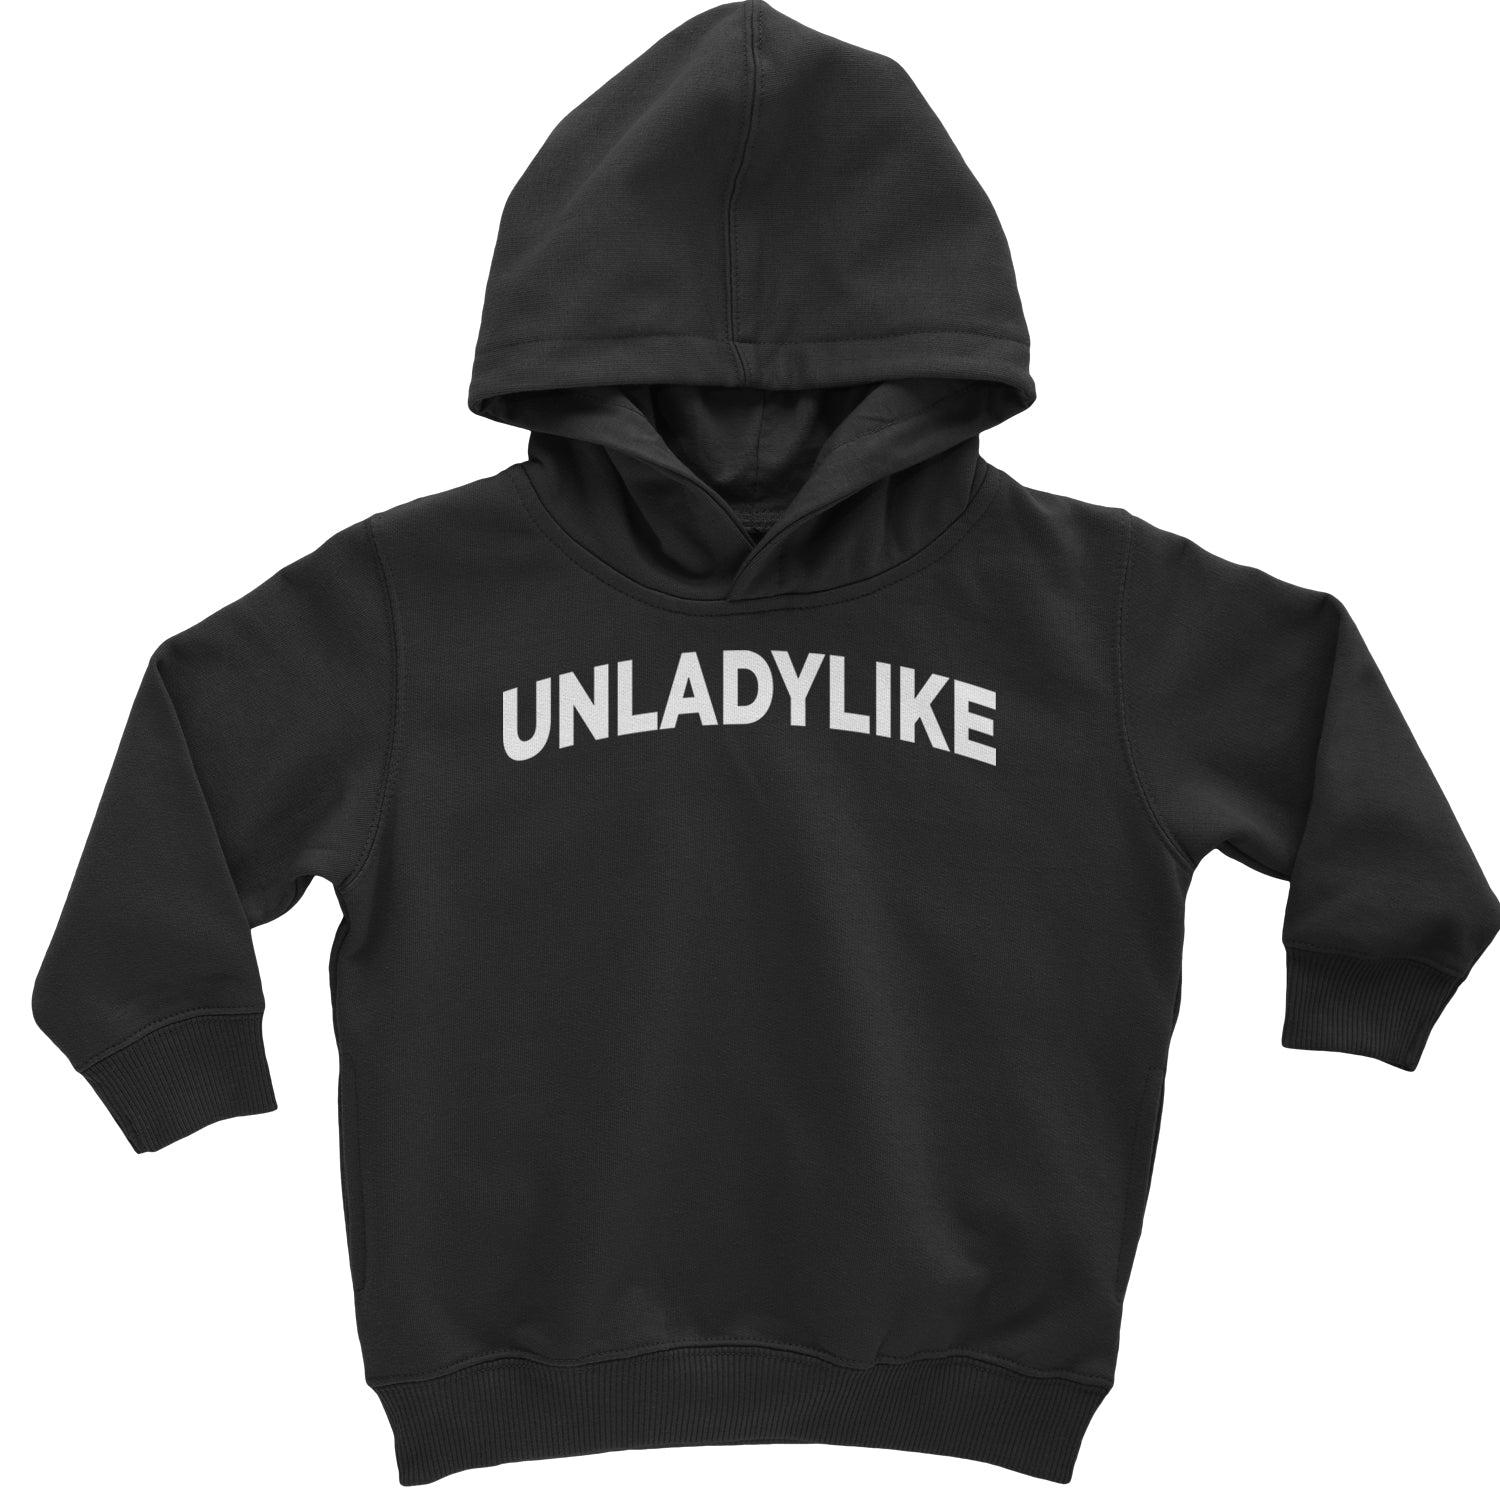 Unladylike Embrace Your Unique Strength Toddler Hoodie And Infant Fleece Romper